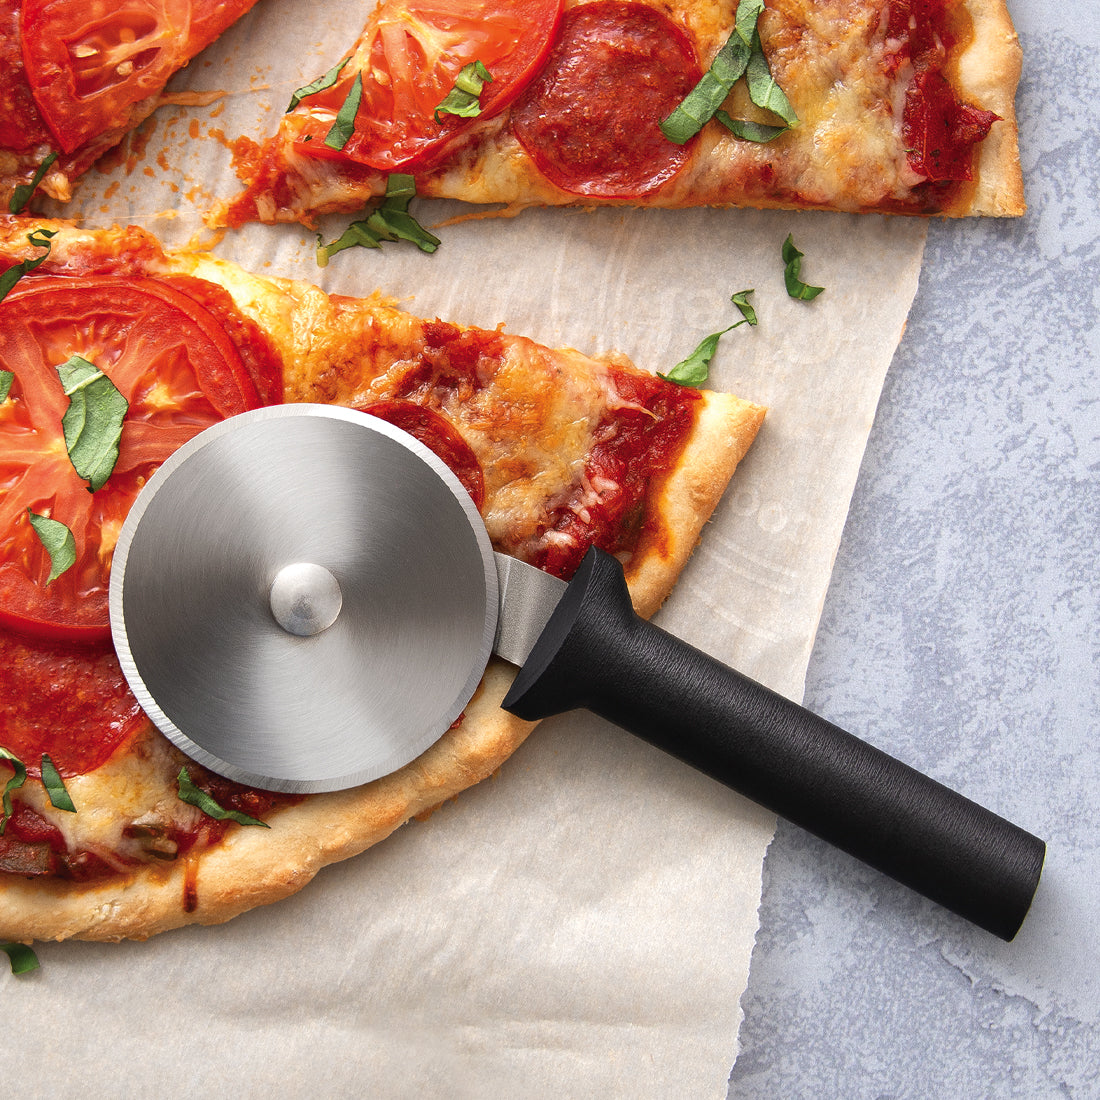 Hot take: Pizza scissors will cut your pizza better than a wheel